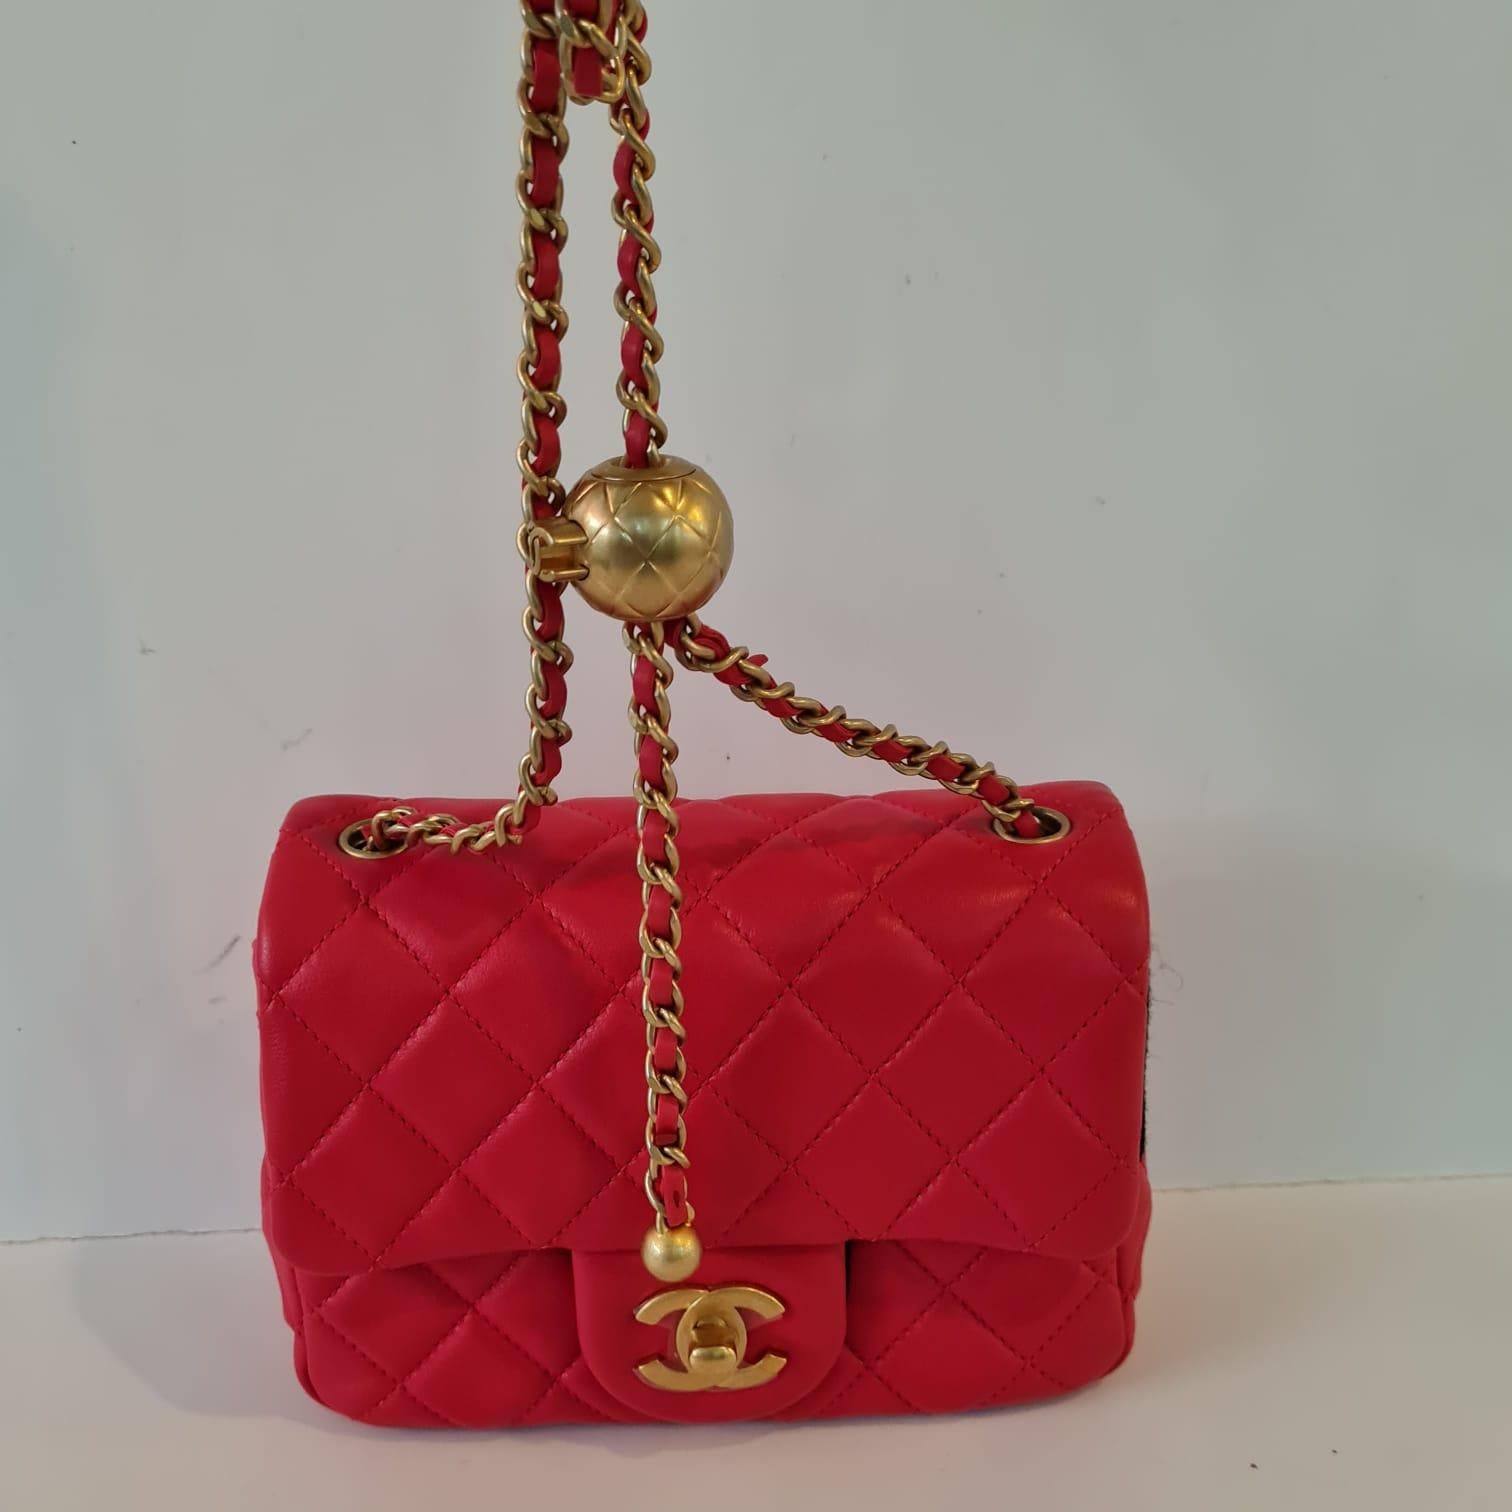 Beautiful chanel mini square pearl crush bag in red lambskin. Overall beautiful condition, with very minor scuffs from light usage. Adjustable strap. Already chipped (2020 production onwards). Comes with its dust bag. 